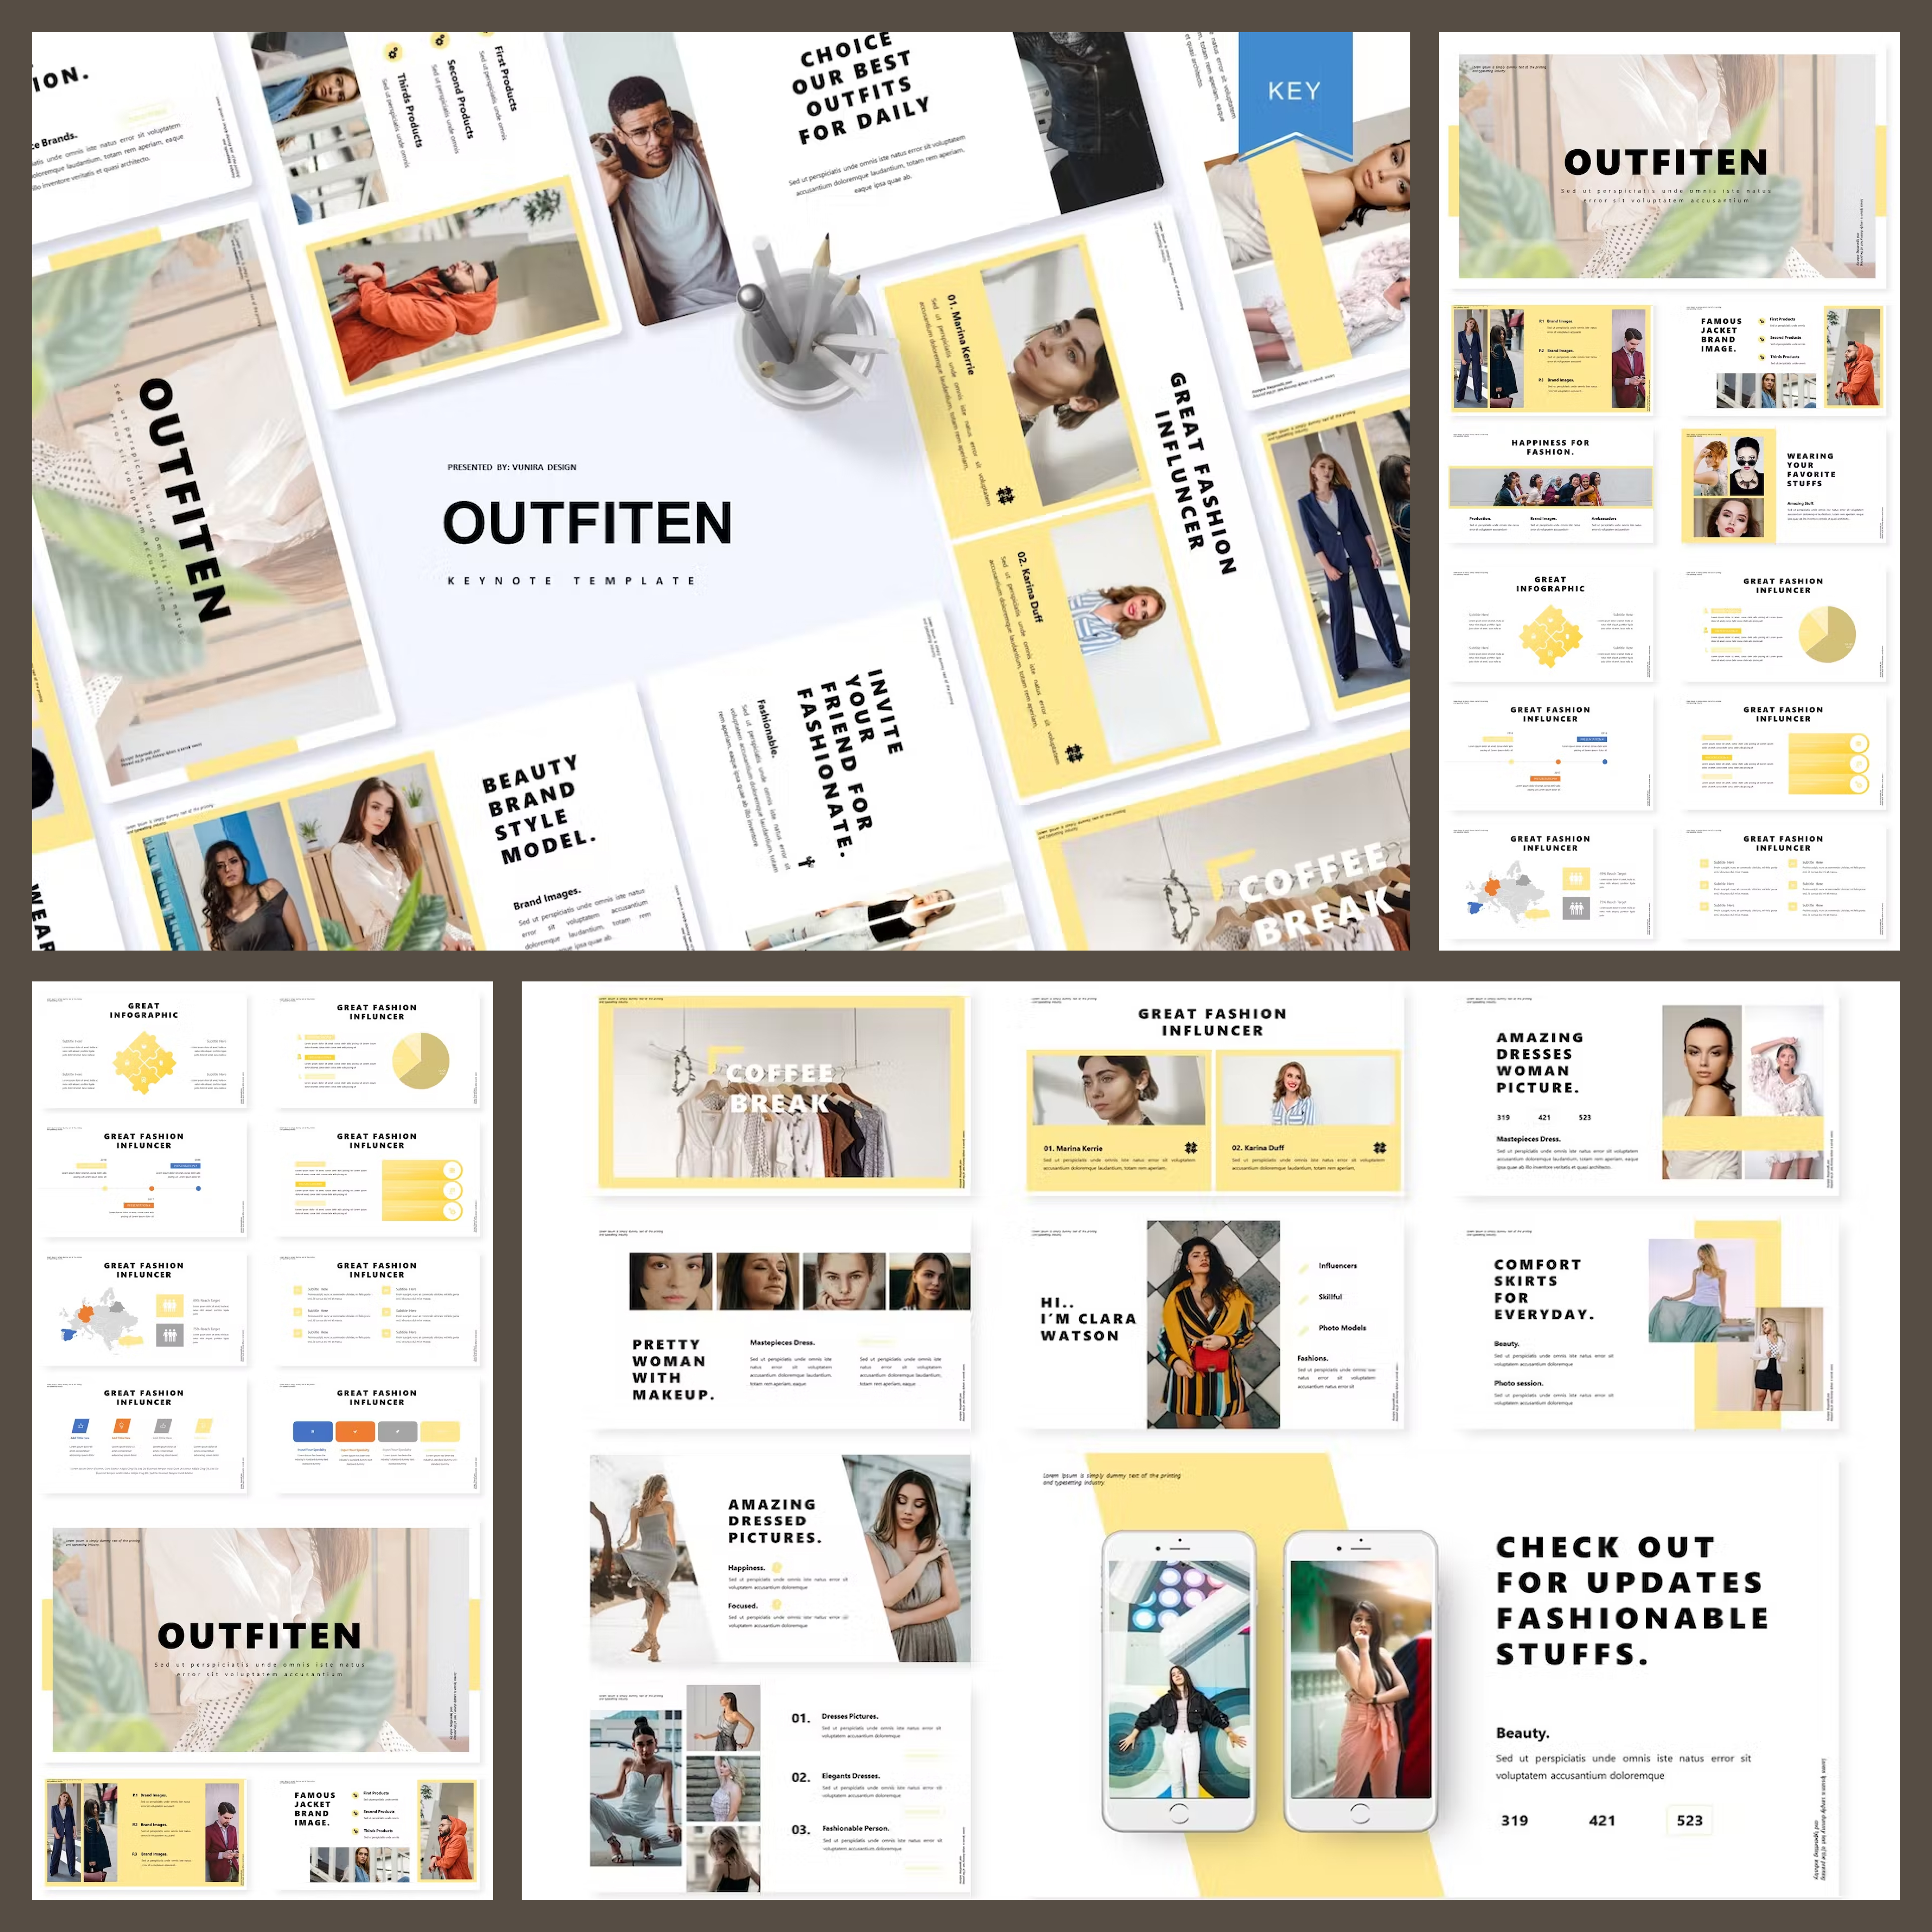 Preview outfiten keynote template.